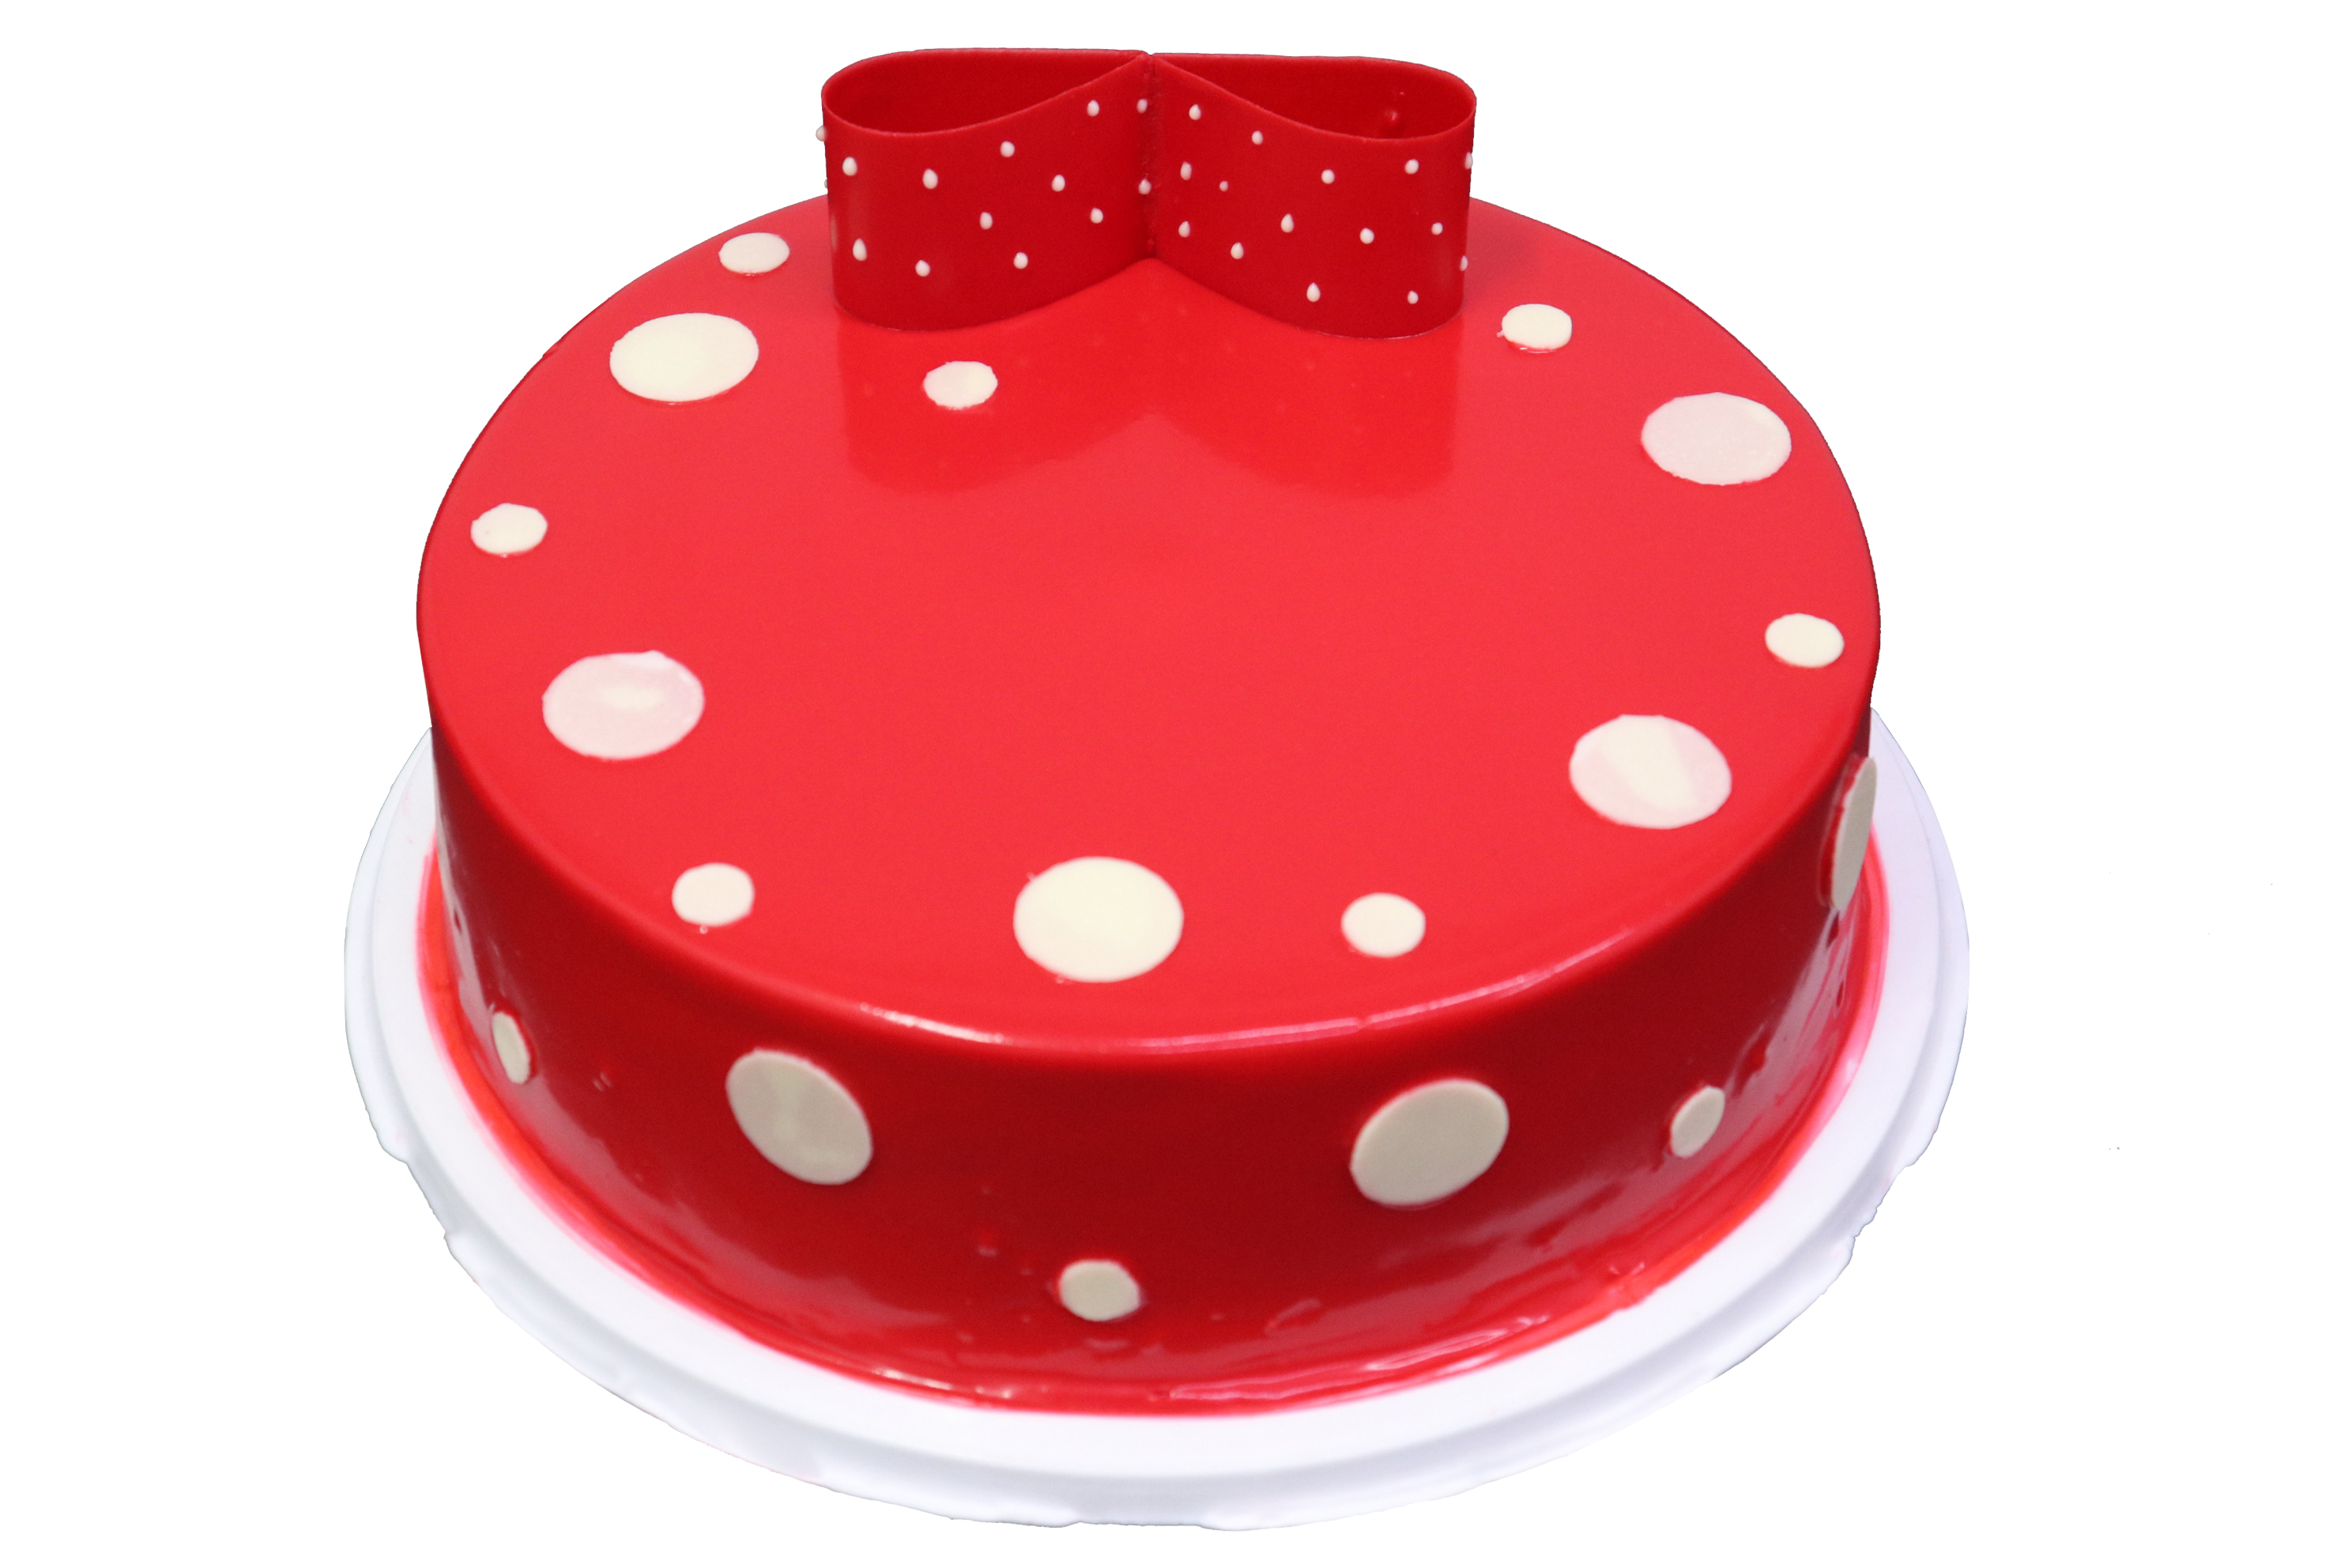 Red Bow Tie Cake